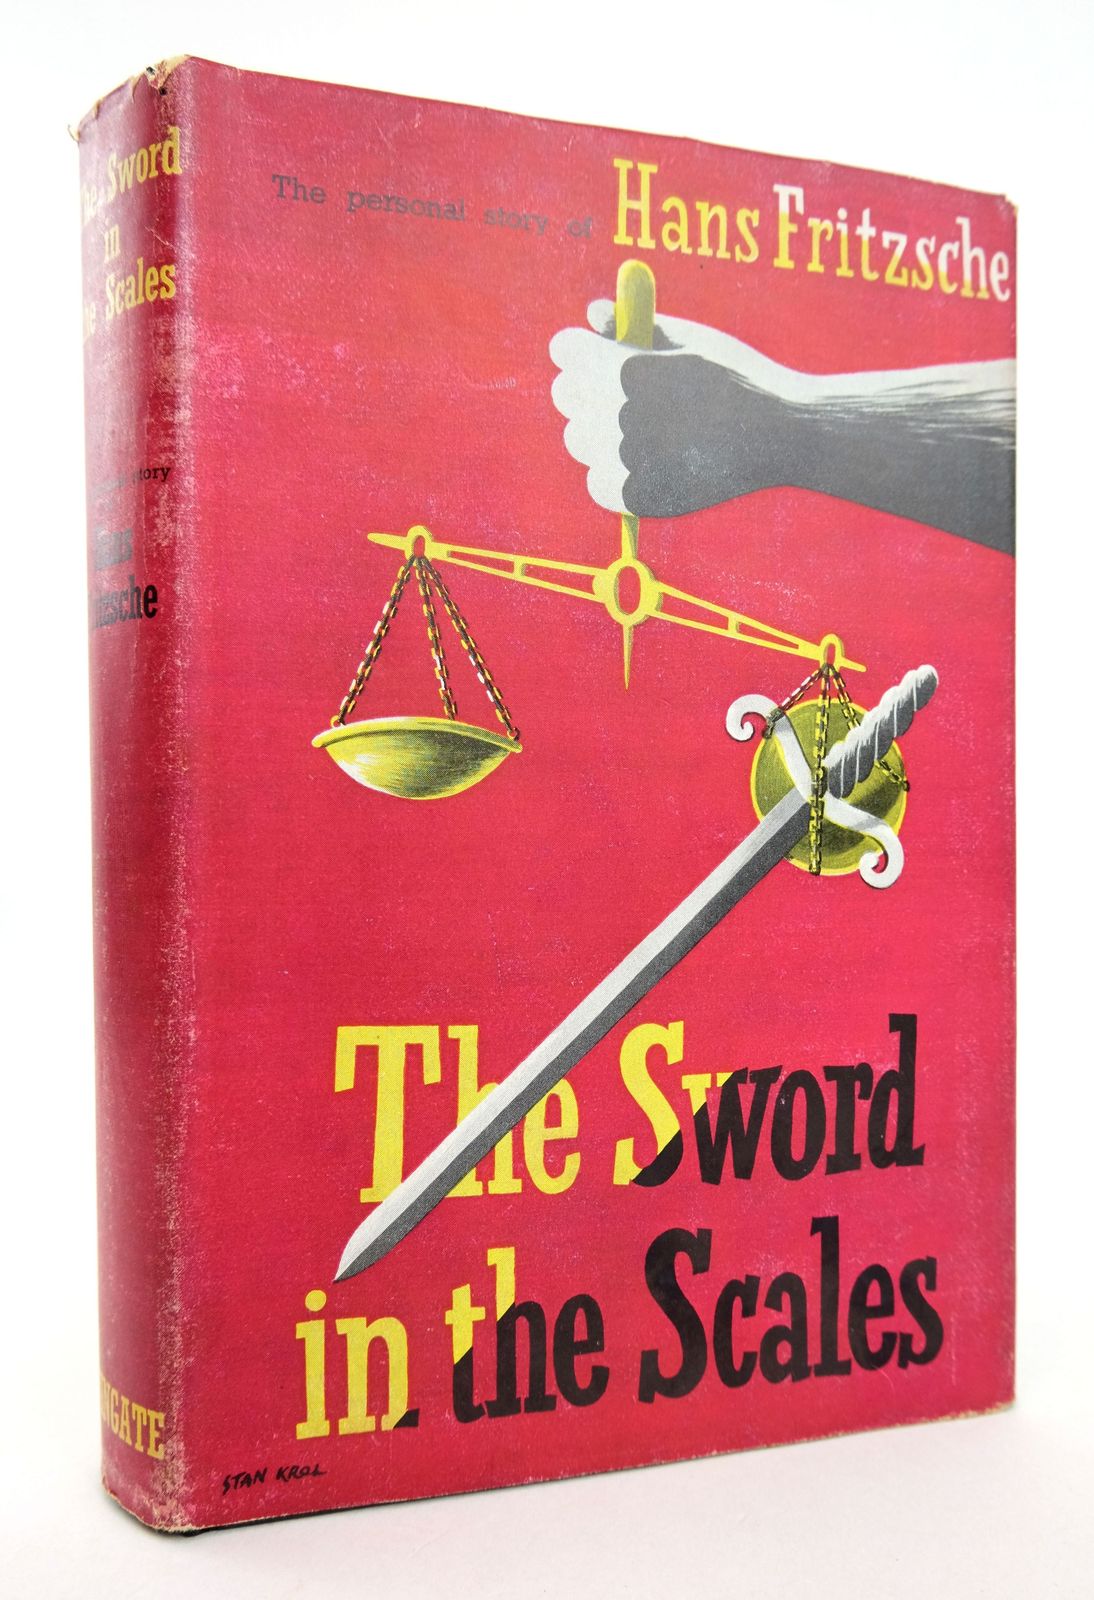 Photo of THE SWORD IN THE SCALES written by Fritzsche, Hans published by Allan Wingate (STOCK CODE: 1819123)  for sale by Stella & Rose's Books